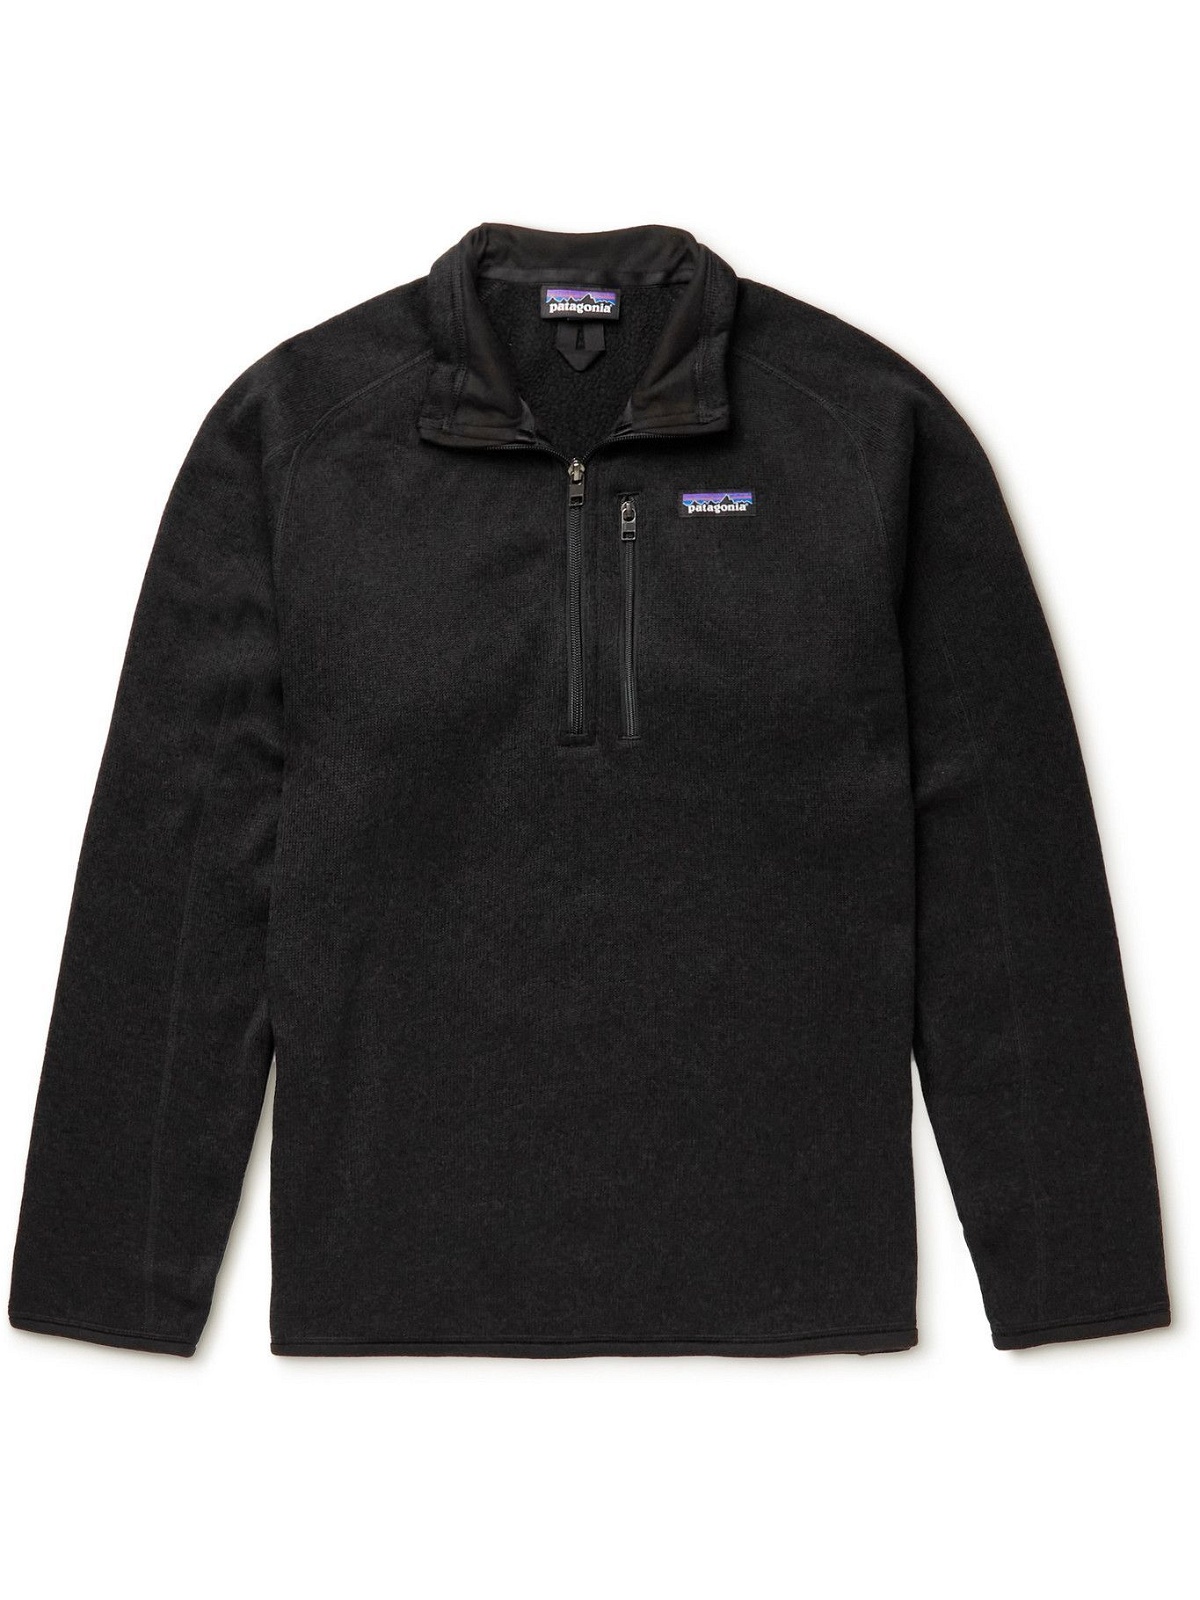 Photo: Patagonia - Better Sweater Recycled Knitted Half-Zip Sweater - Black